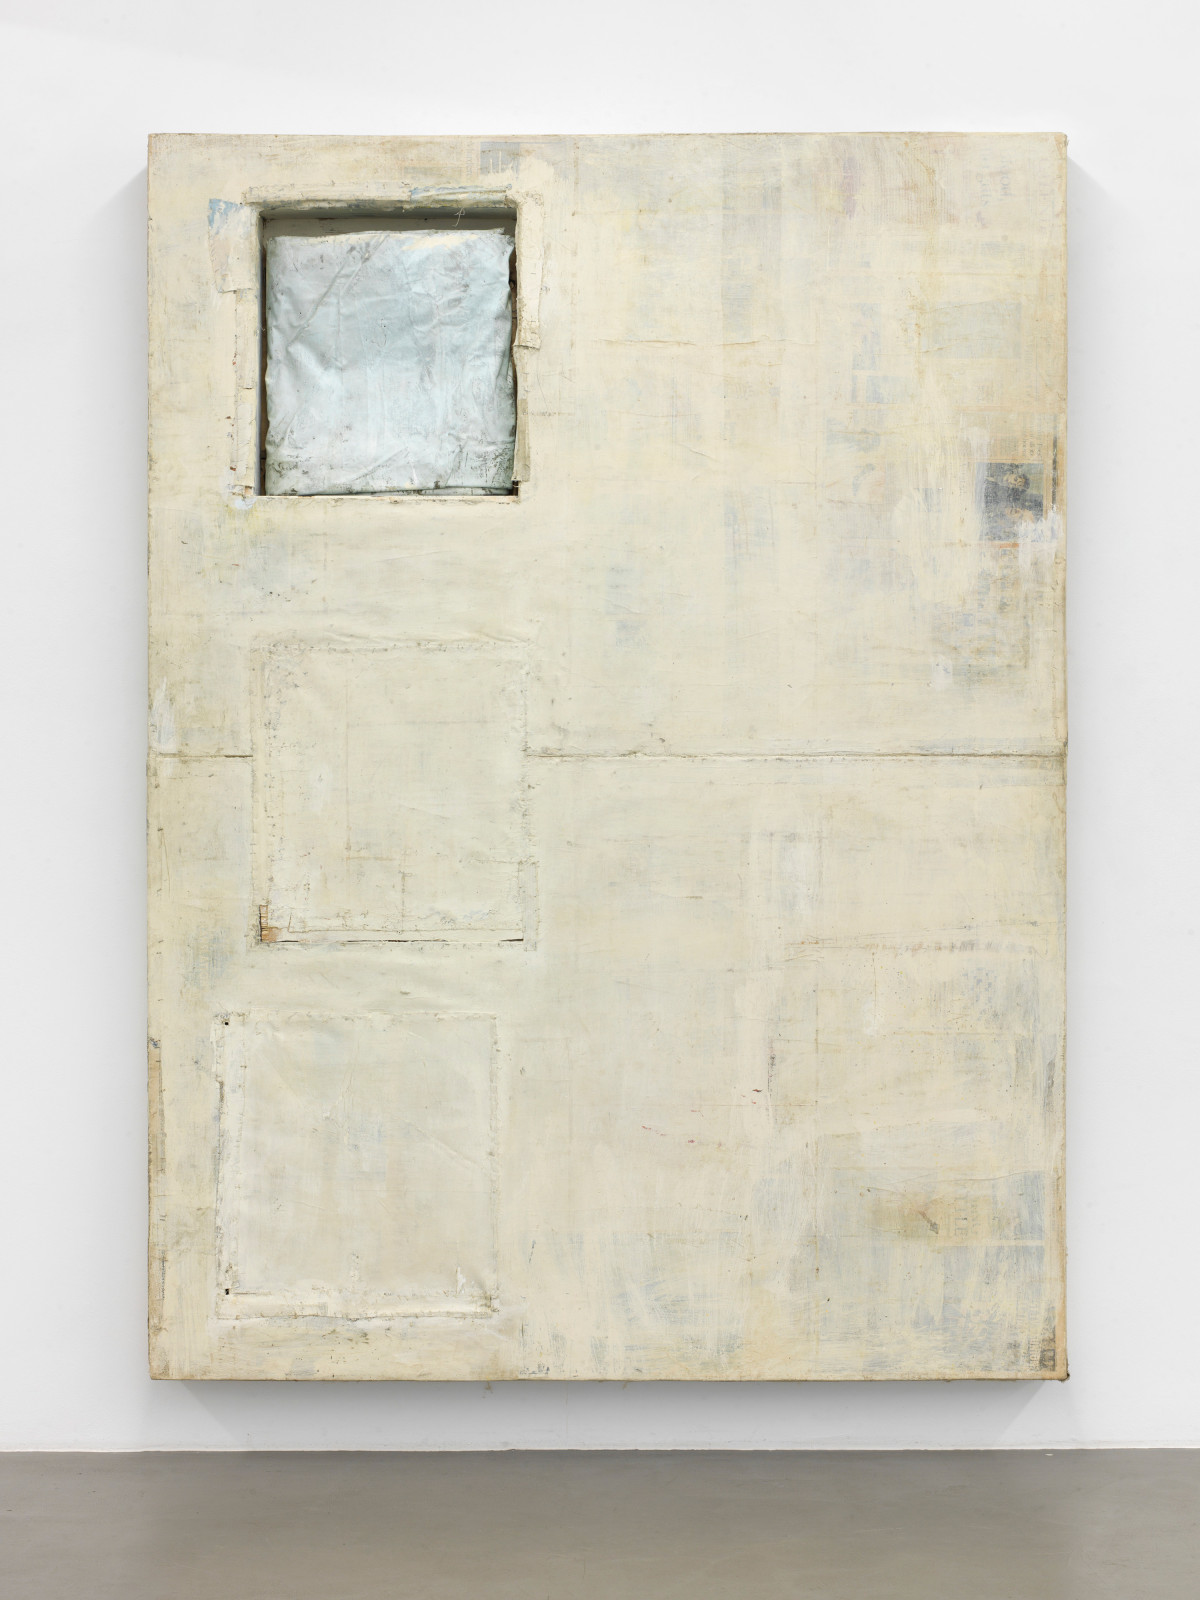 Lawrence Carroll, ‘Untitled’, 2003-2016, Oil, wax, house paint, newspaper, staples, canvas on wood